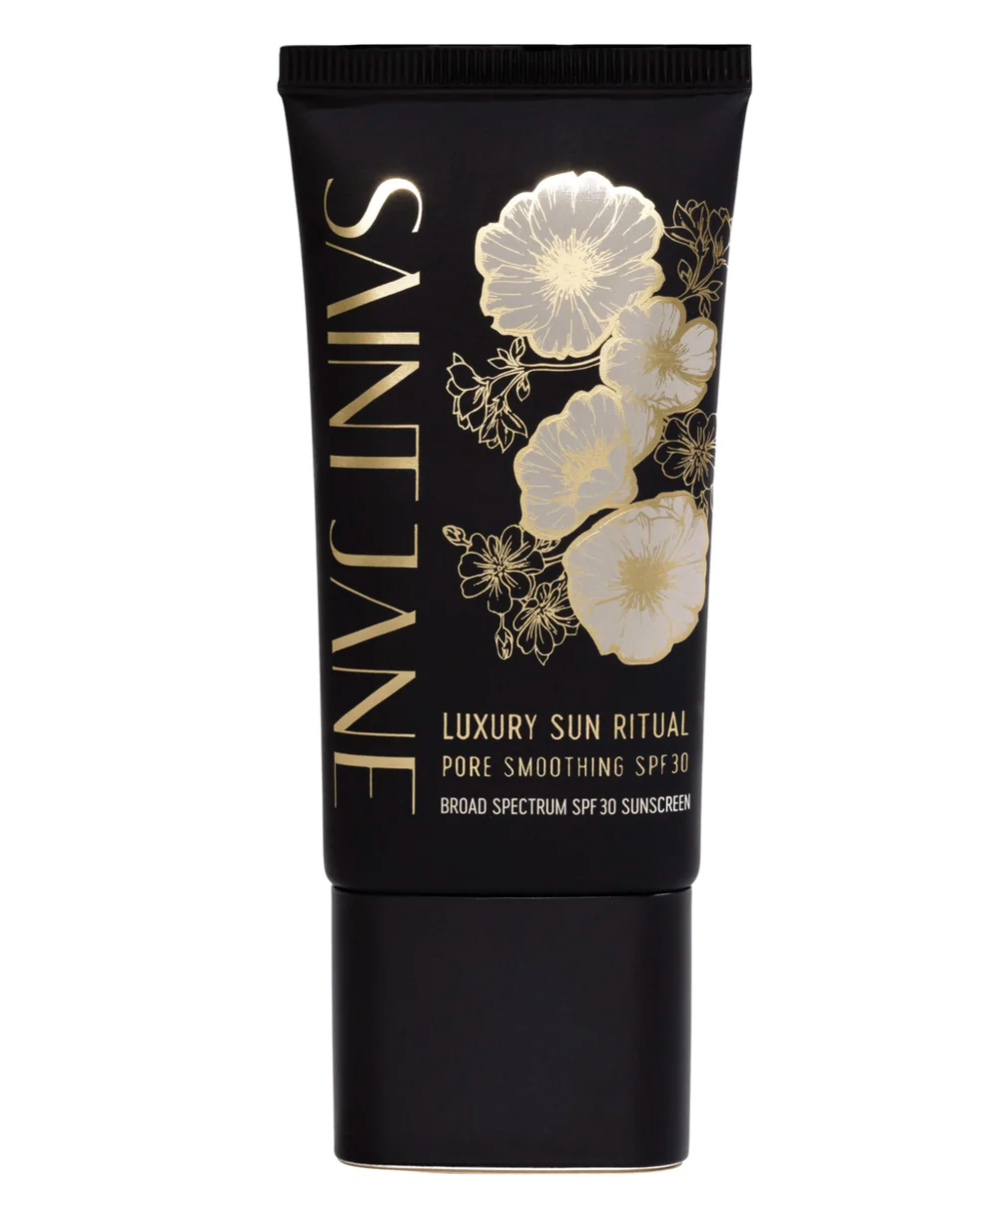 Saint Jane Beauty - You'll toss all your other sunscreens after you try this.